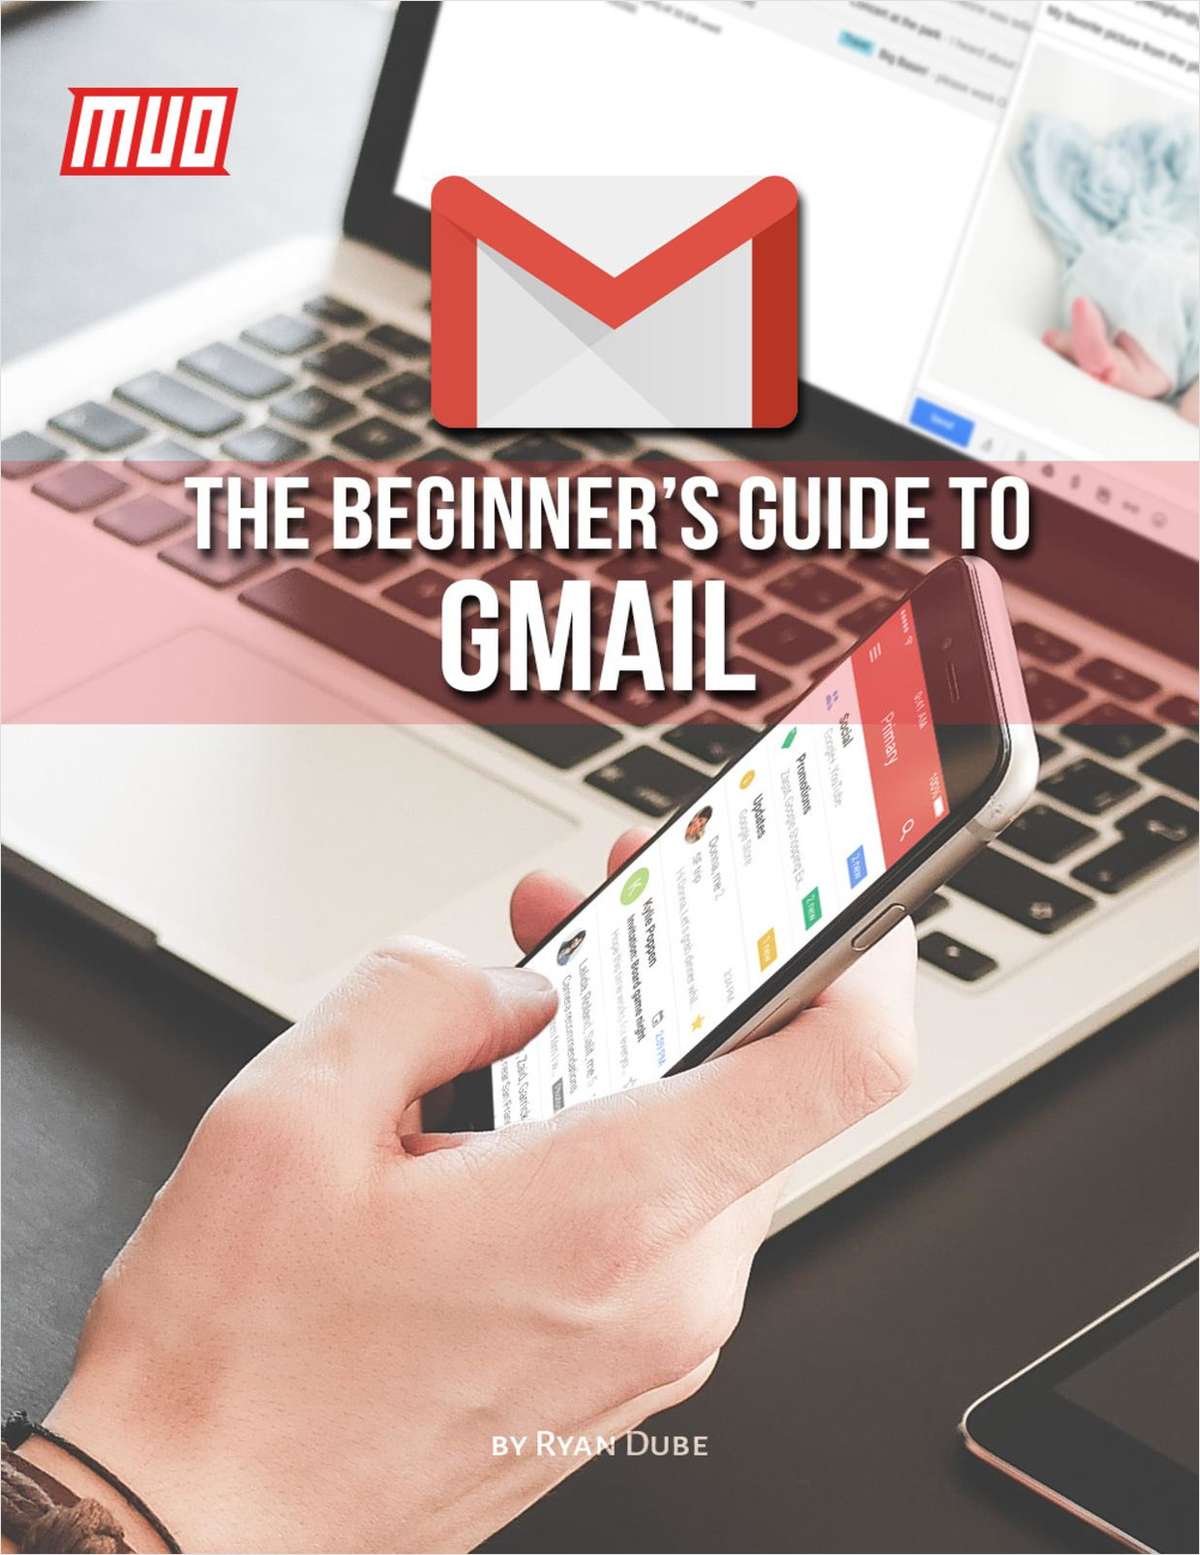 The Beginner's Guide to Gmail